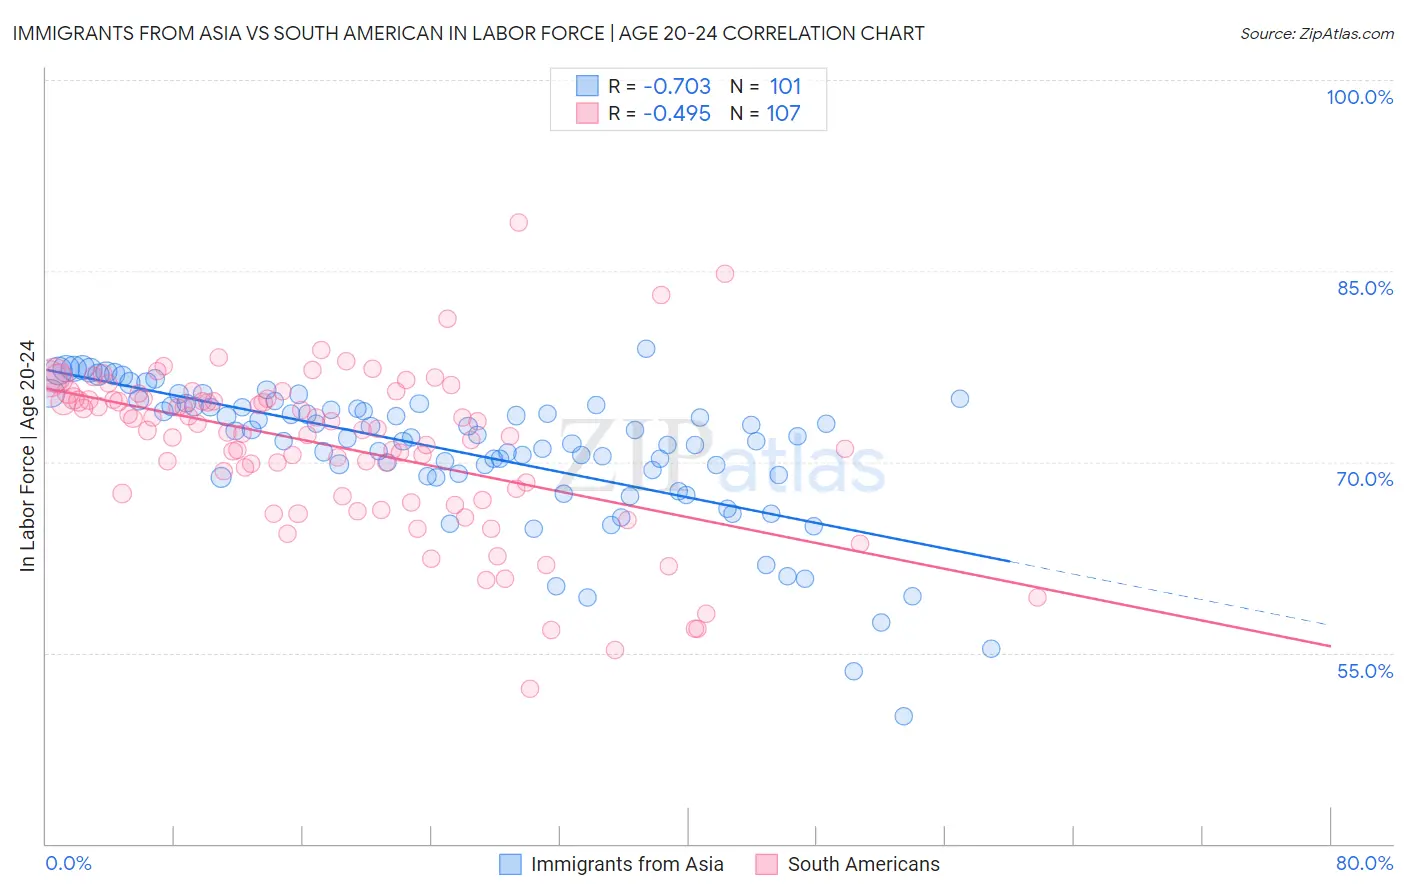 Immigrants from Asia vs South American In Labor Force | Age 20-24